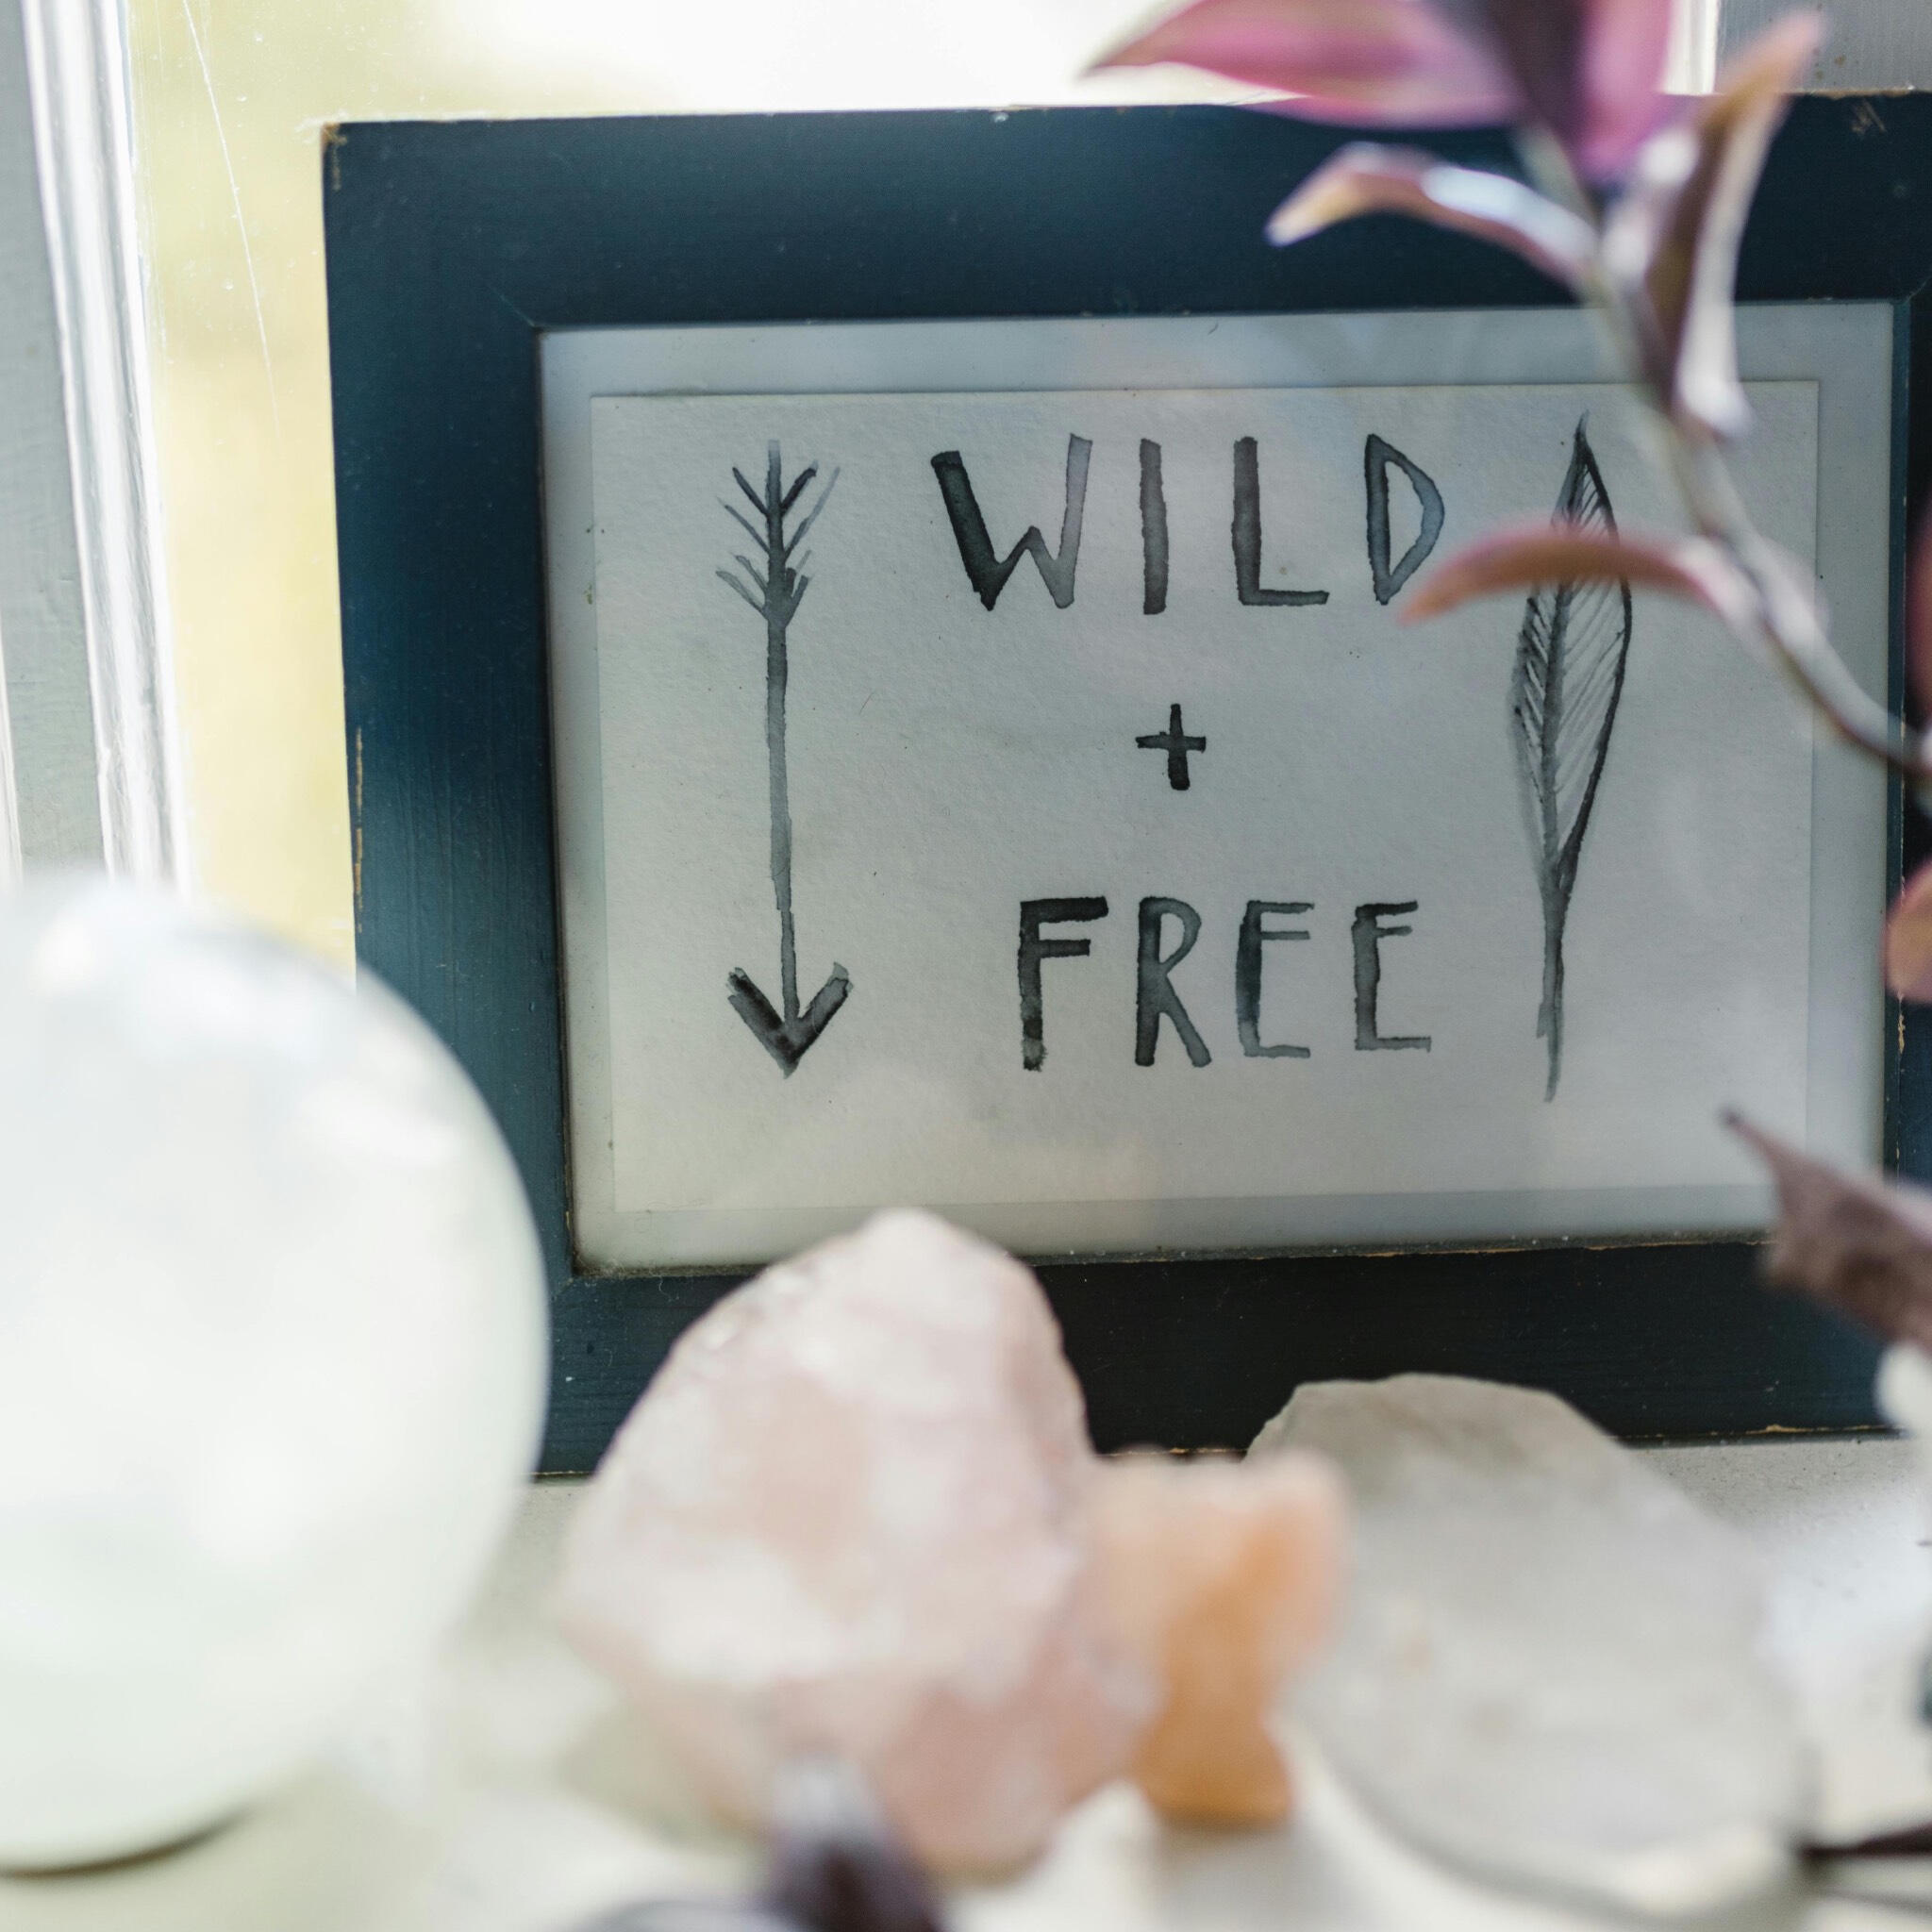 This is a photo of some crystals in front of a sign which reads Wild and Free.